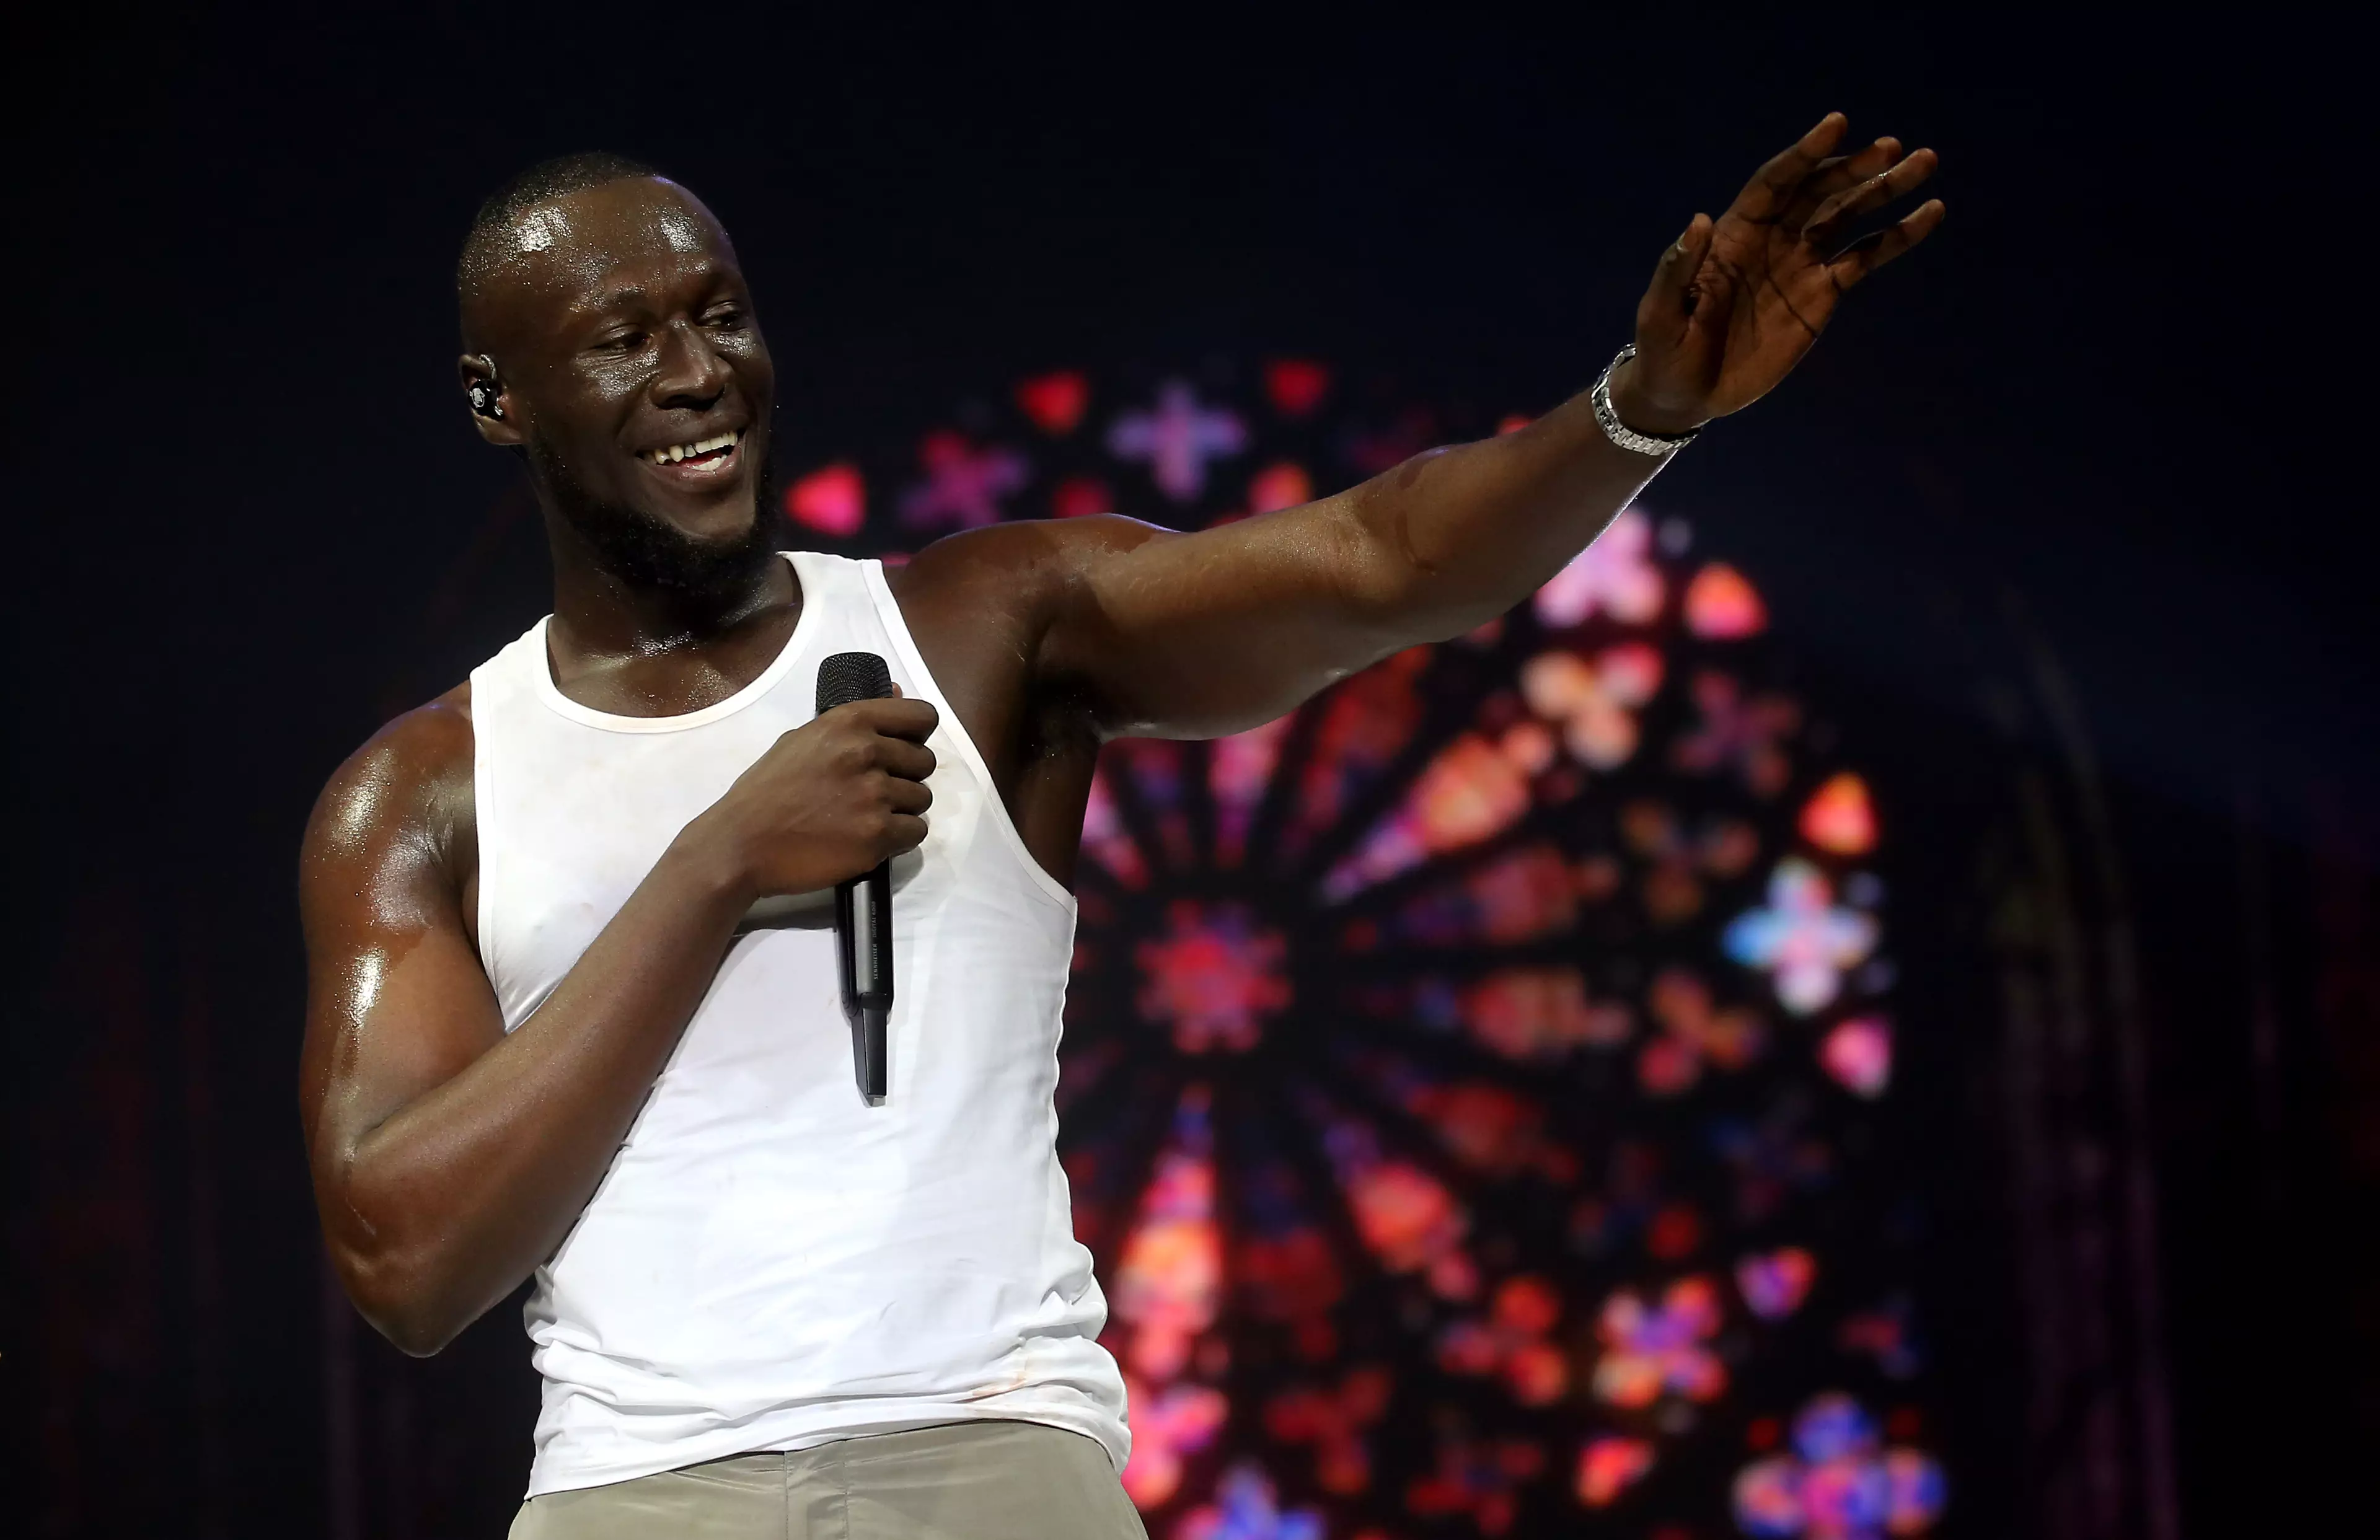 Stormzy also advised people not to use social media if it made them feel bad.